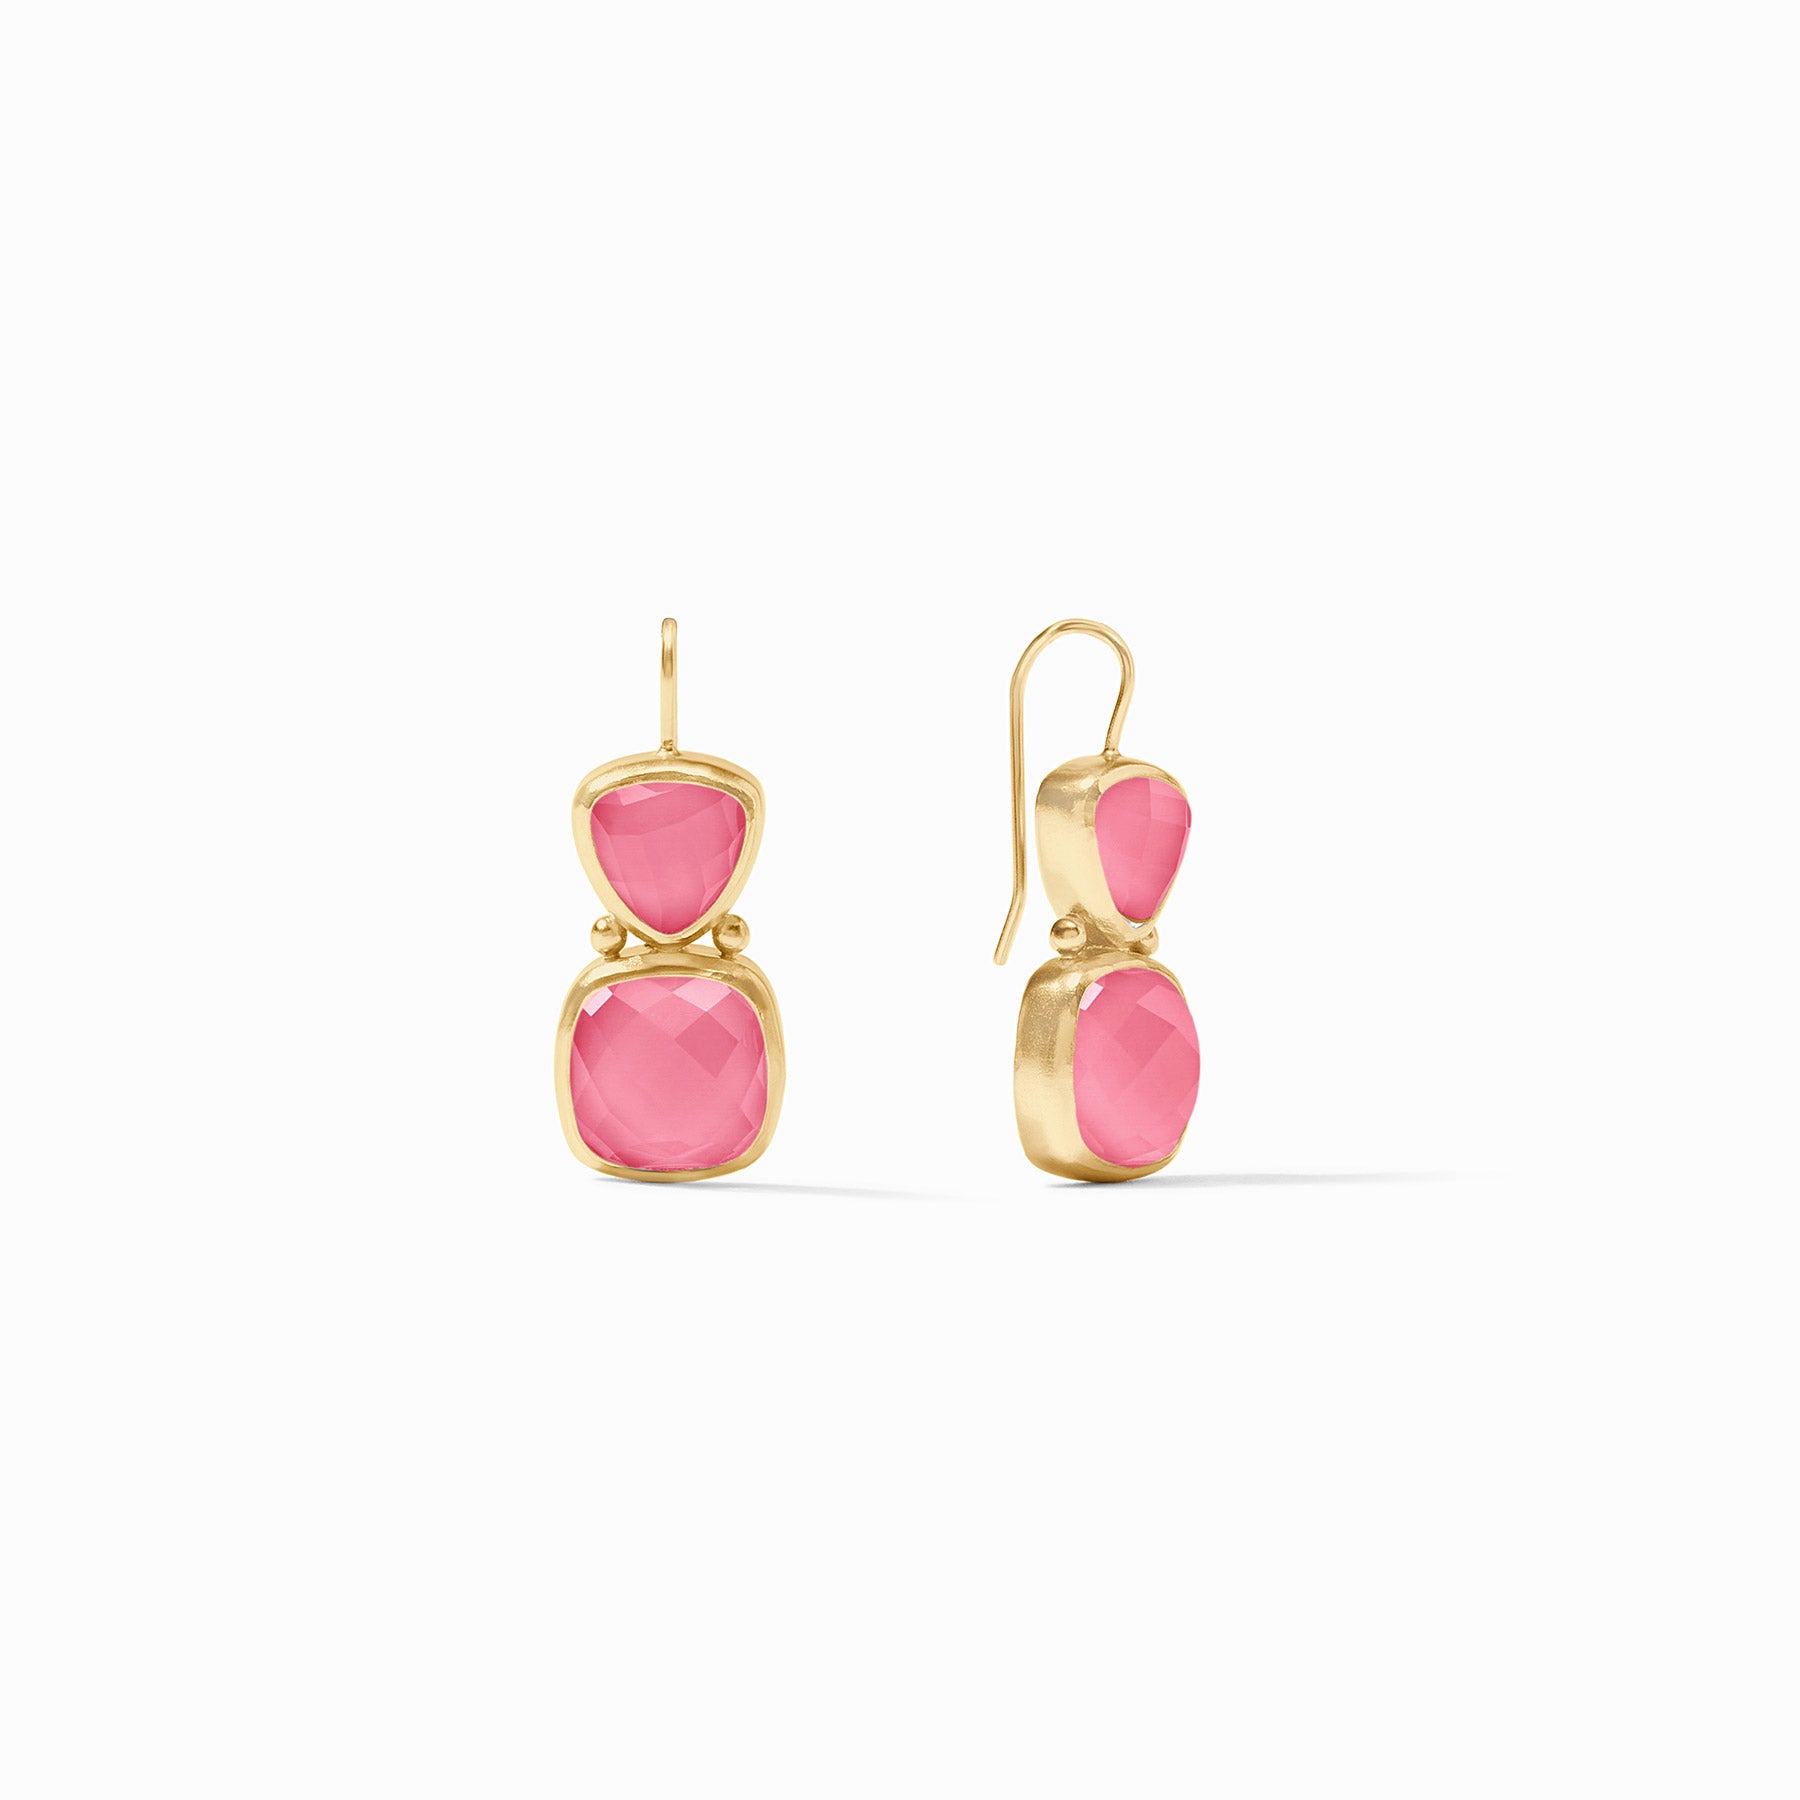 Julie Vos - Aquitaine Earring, Iridescent Peony Pink